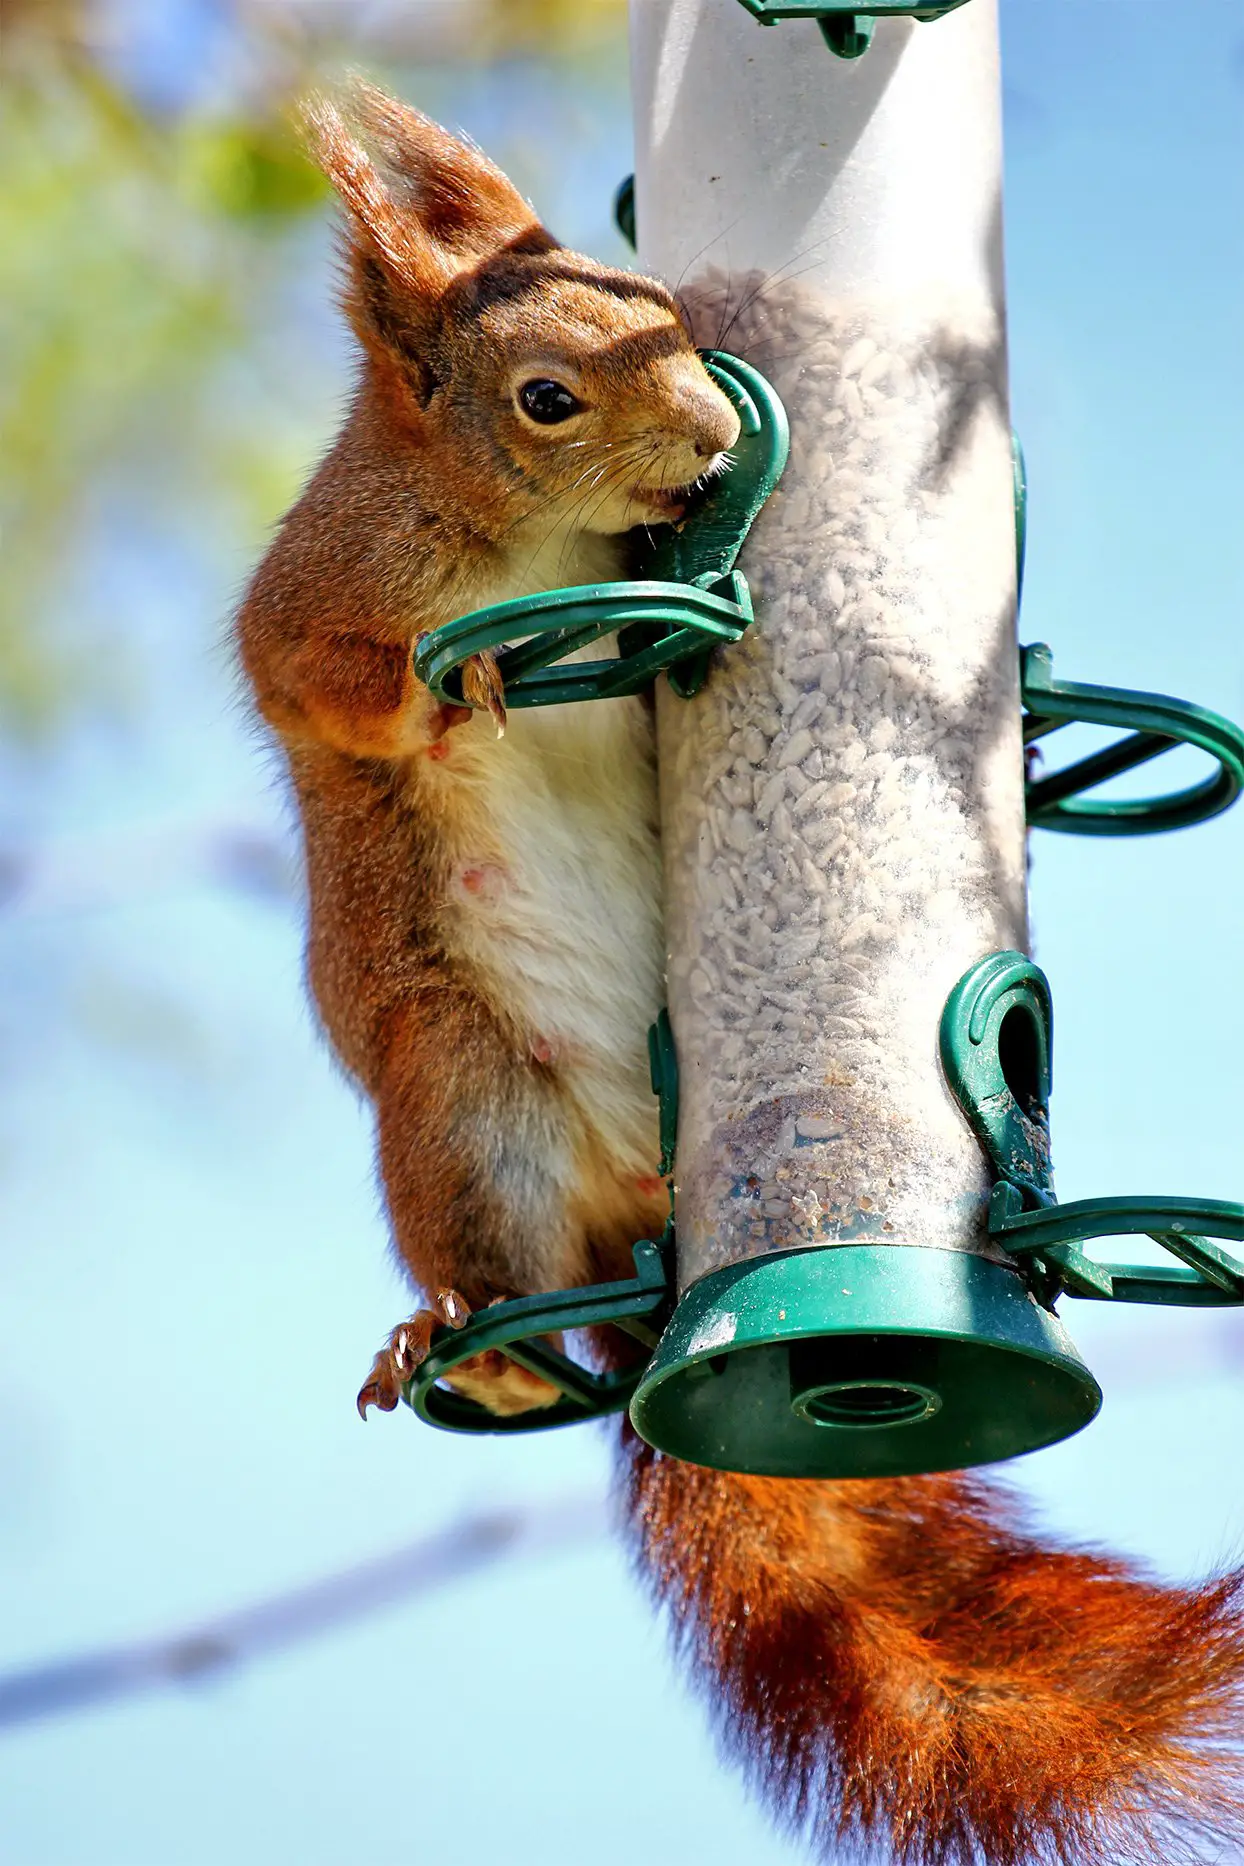 How To Keep Squirrels Off Your Patio Furniture